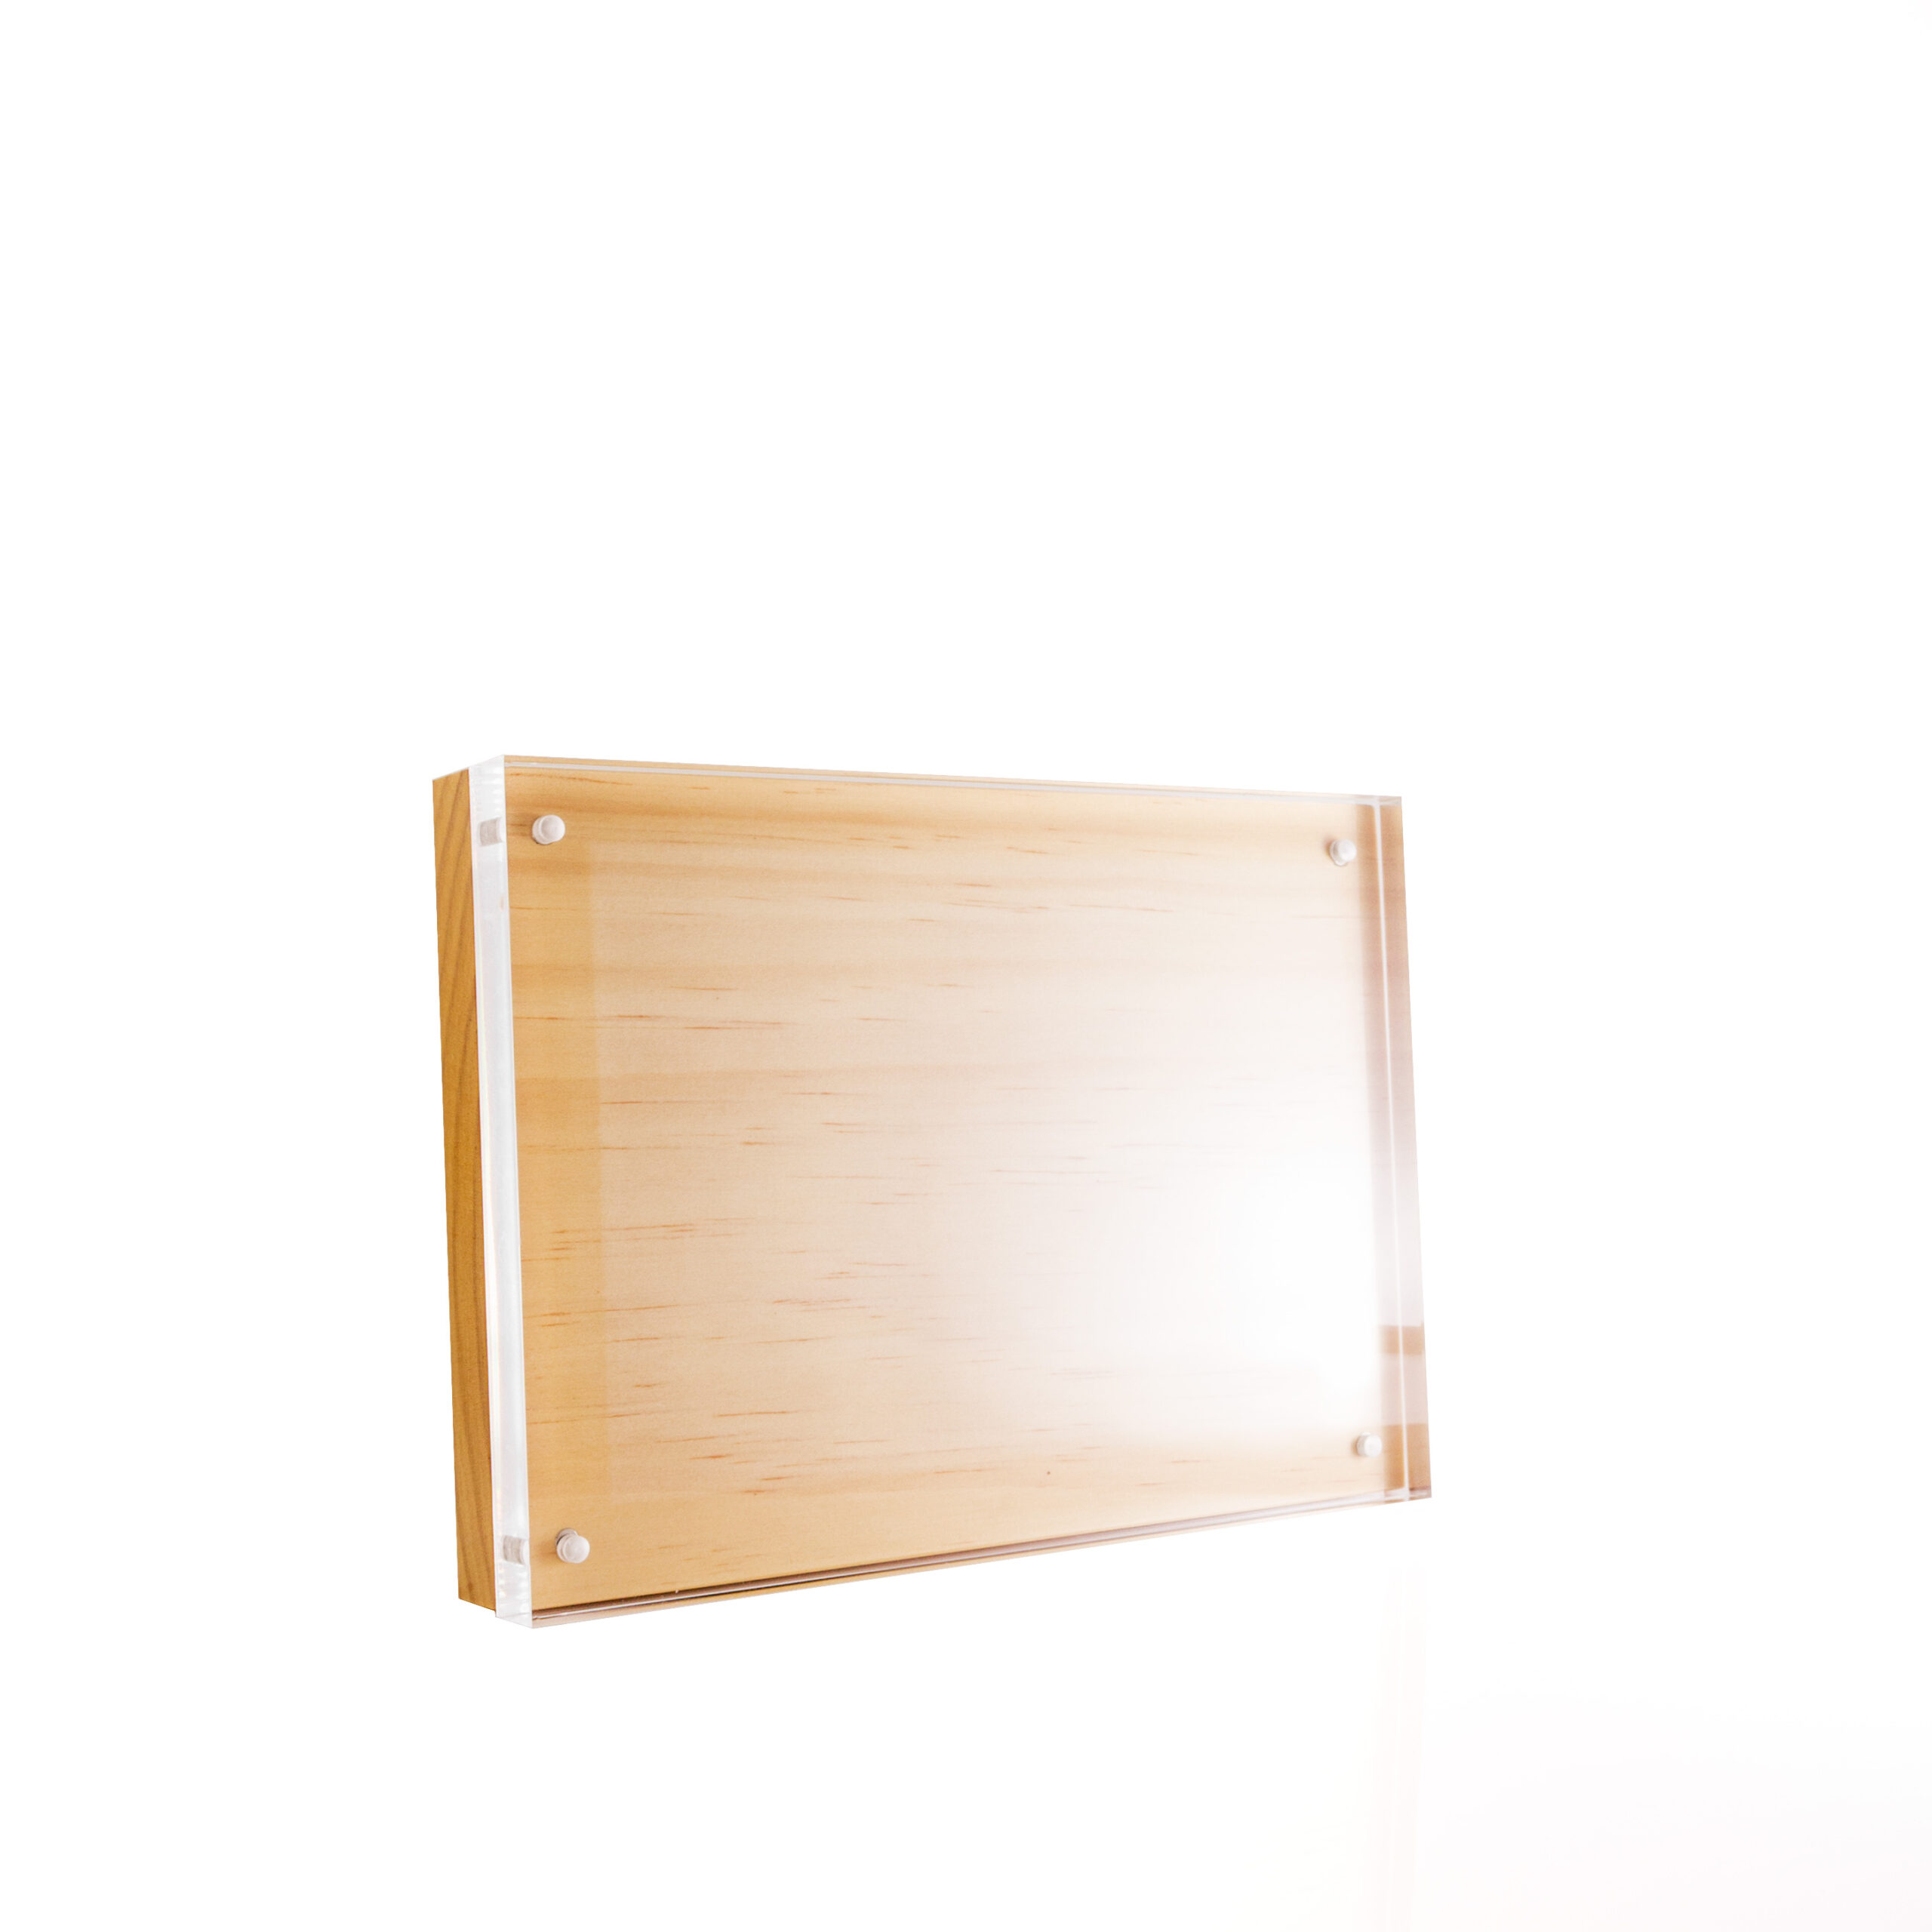 Wooden Picture Frames, 5x7 photo frame, Solid Wood HD Plexiglass